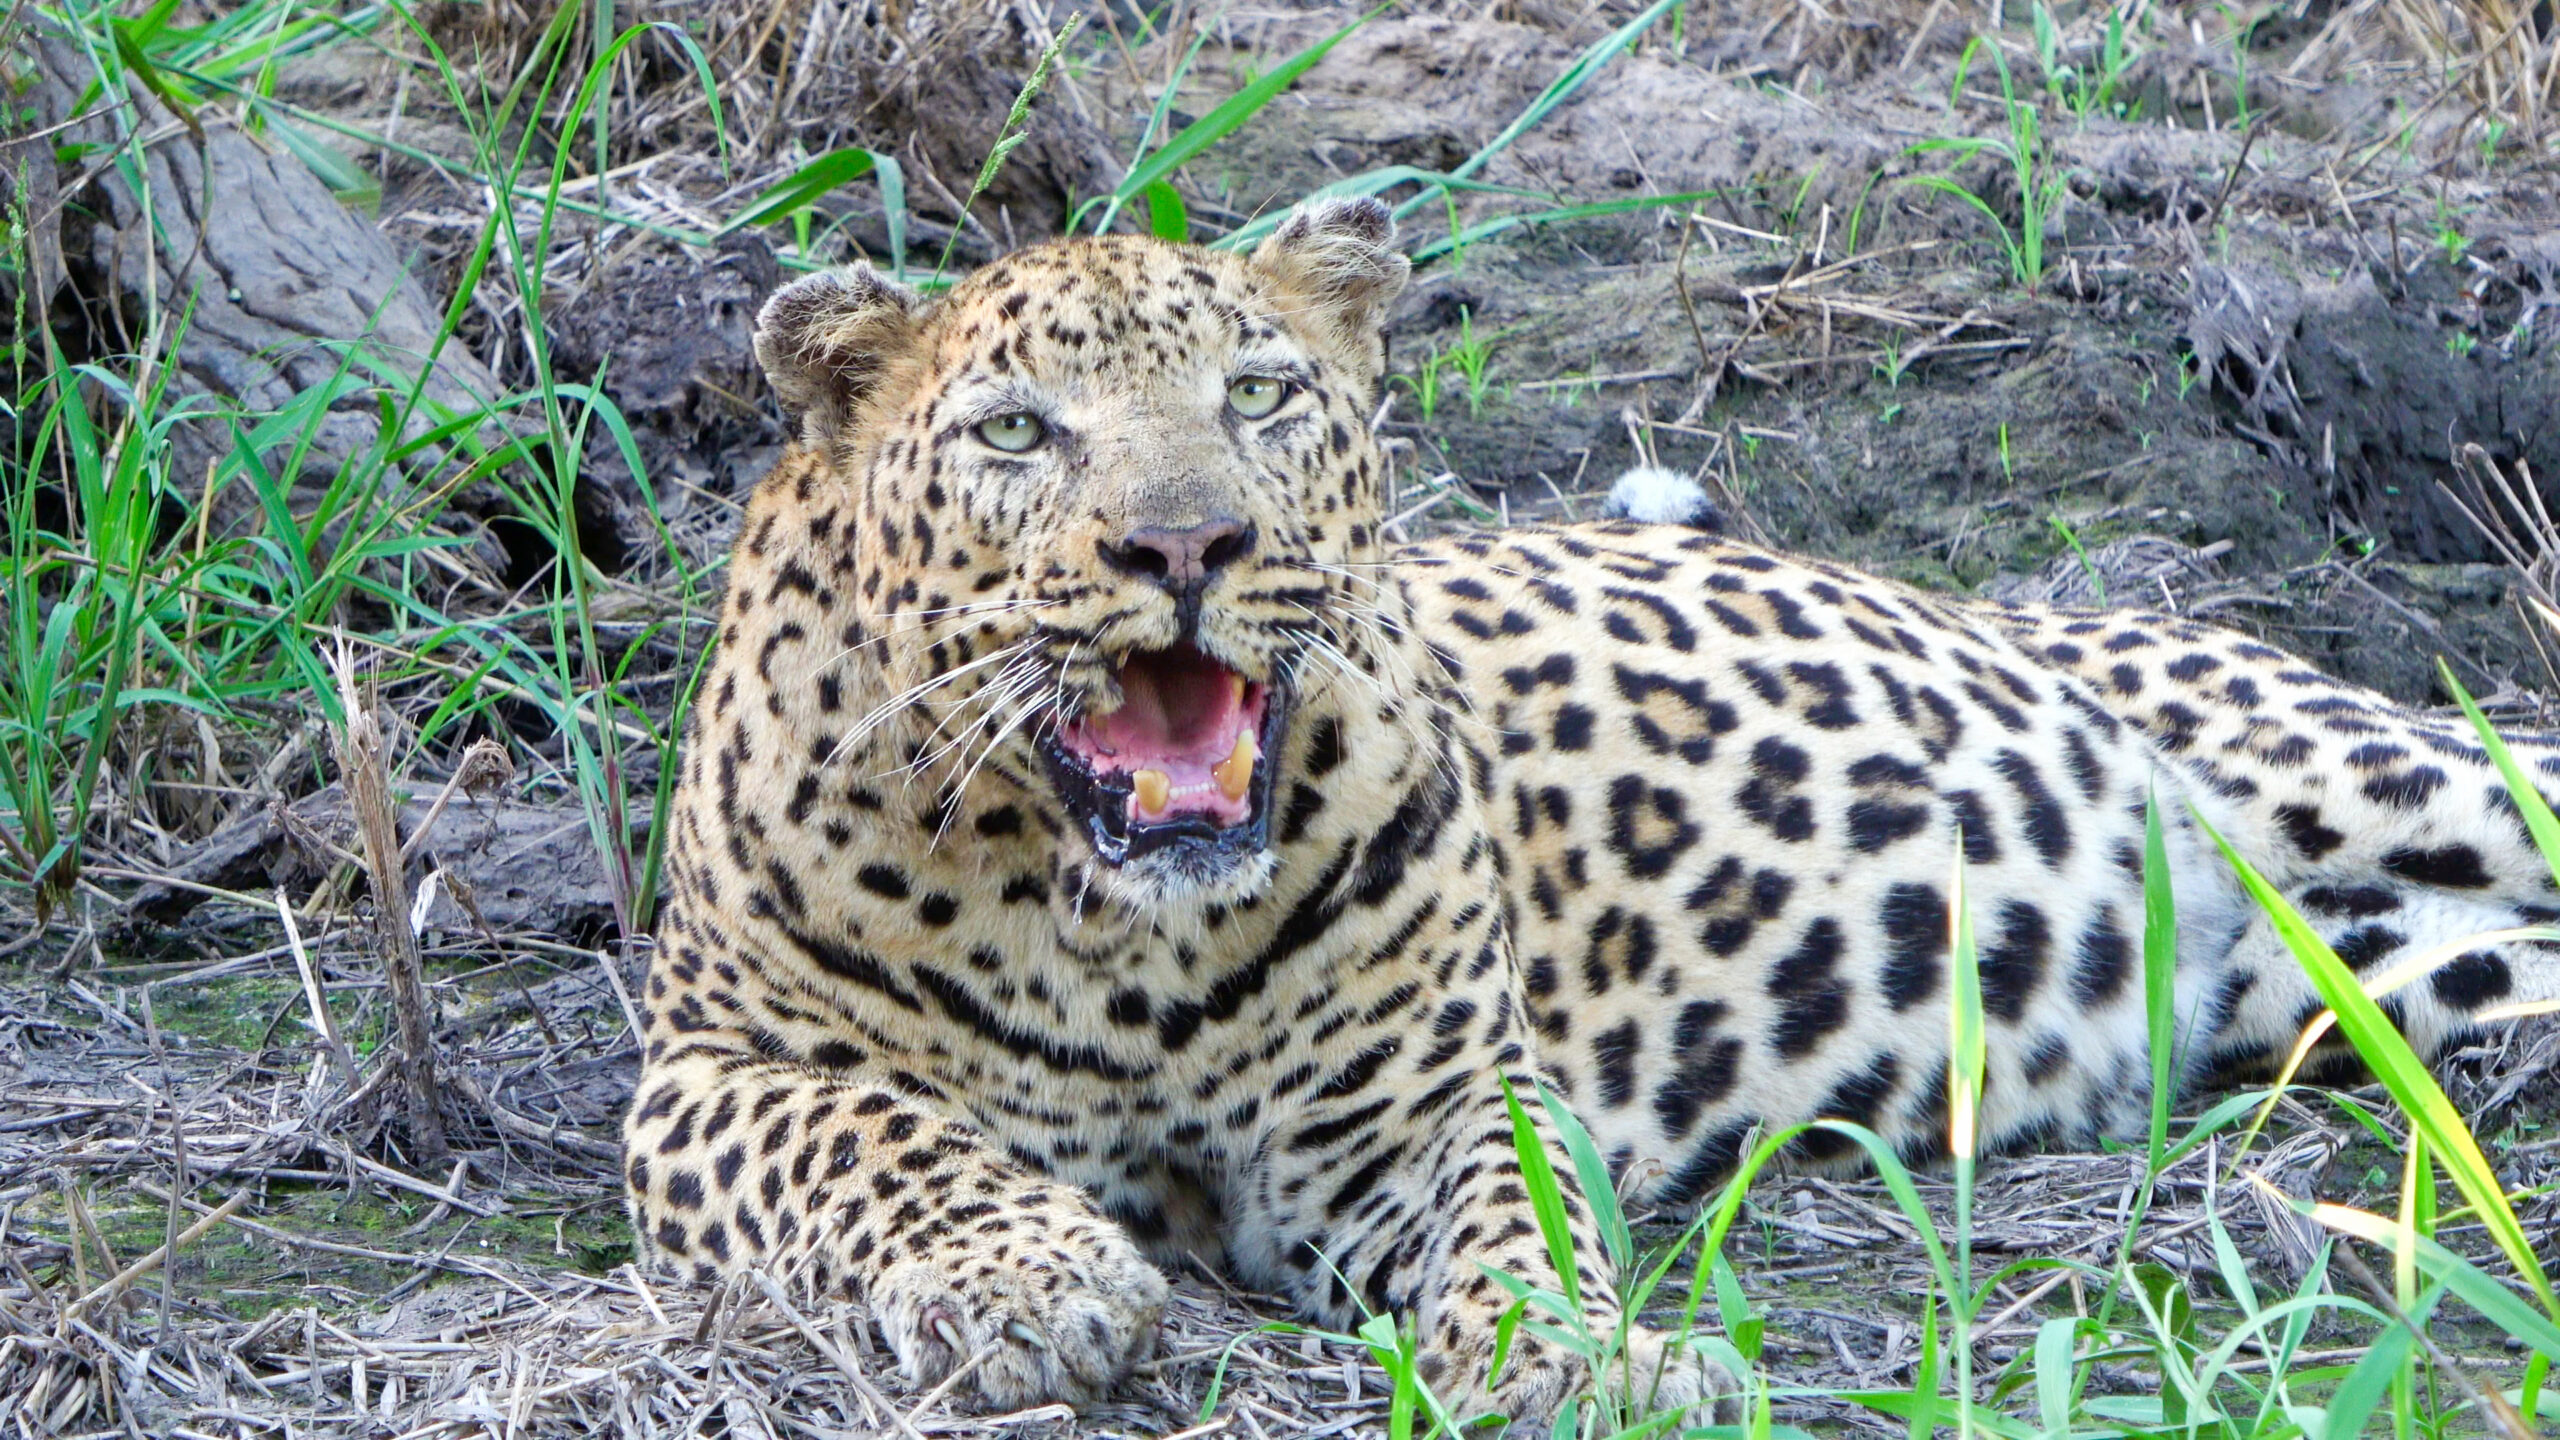 As a key member of the Big Five, leopards play a significant role in wildlife tourism. People often see them as symbols of the untamed wilderness and the beauty of Africa's natural heritage. The thrill of finding and observing a leopard in its natural habitat enhances the overall safari experience, making it a top highlight for many visitors.